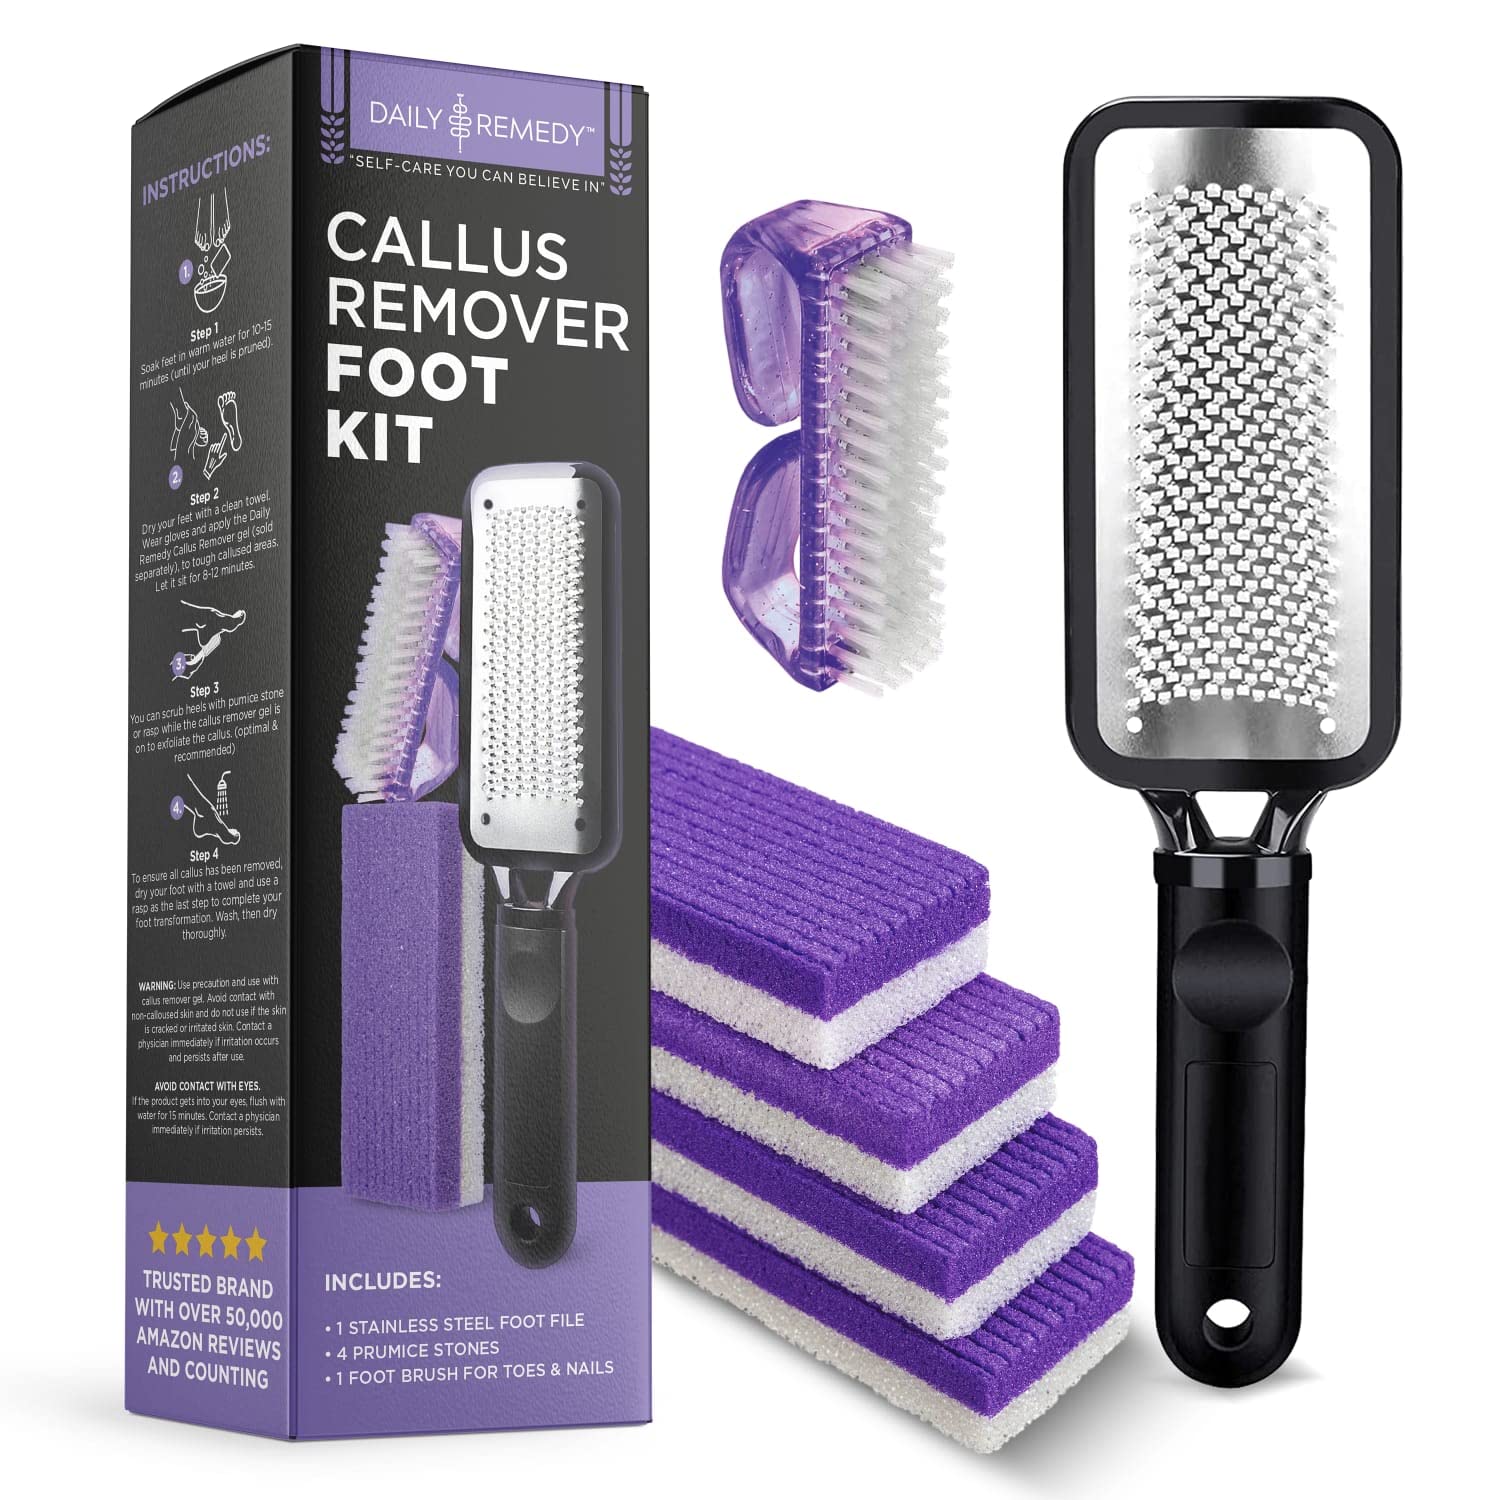 DAILY REMEDY Foot Callus Remover Set - Includes 1 Stainless rasp